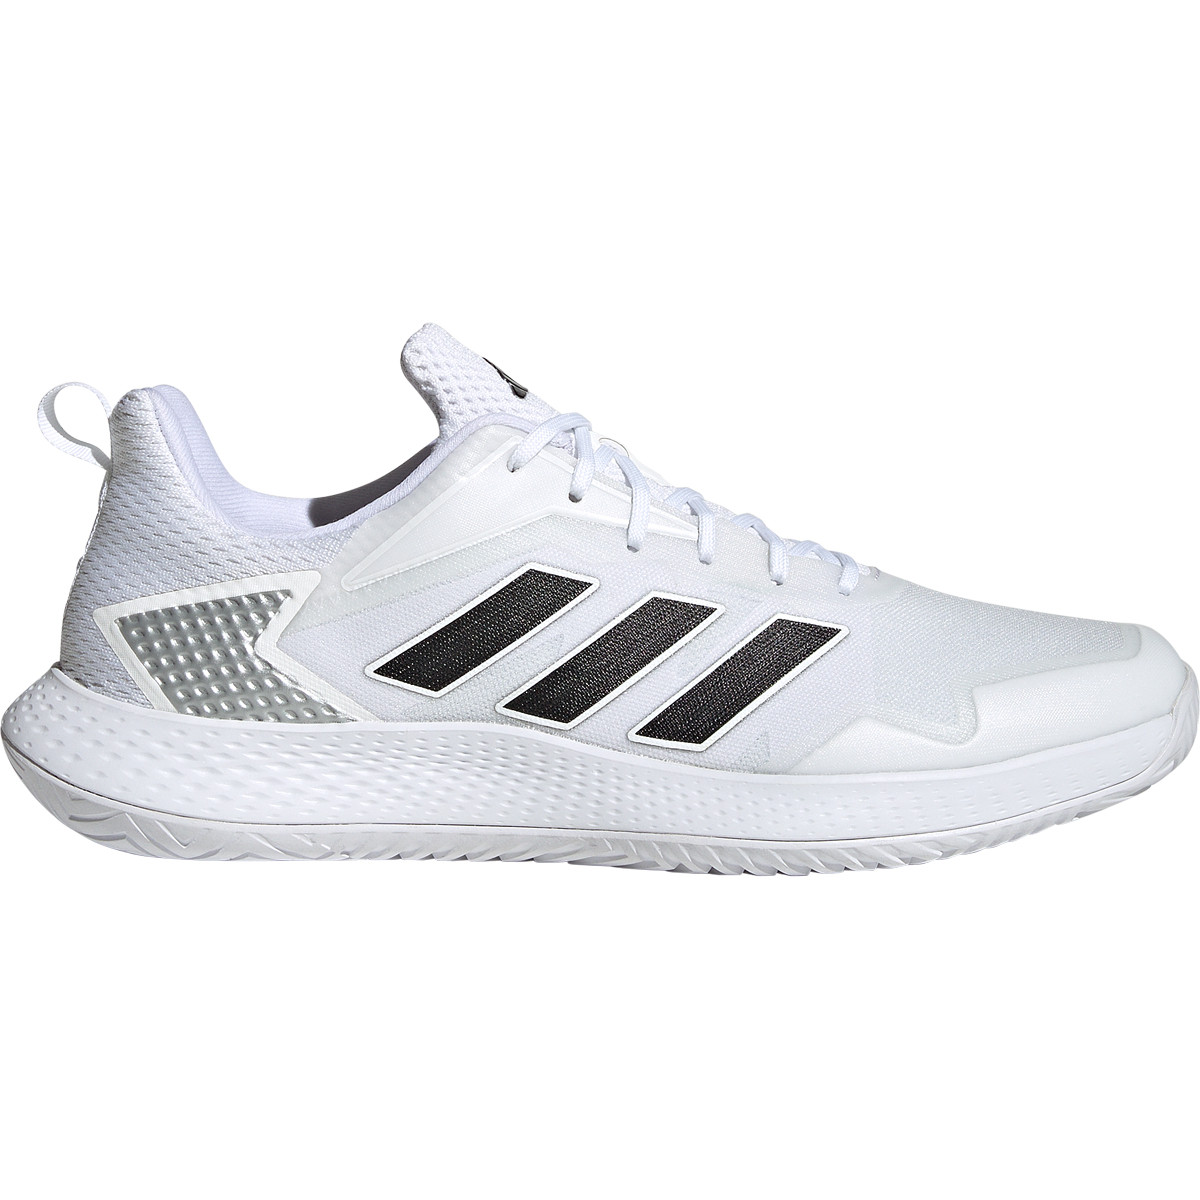 CHAUSSURES ADIDAS DEFIANT SPEED TOUTES SURFACES - ADIDAS - Homme -  Chaussures